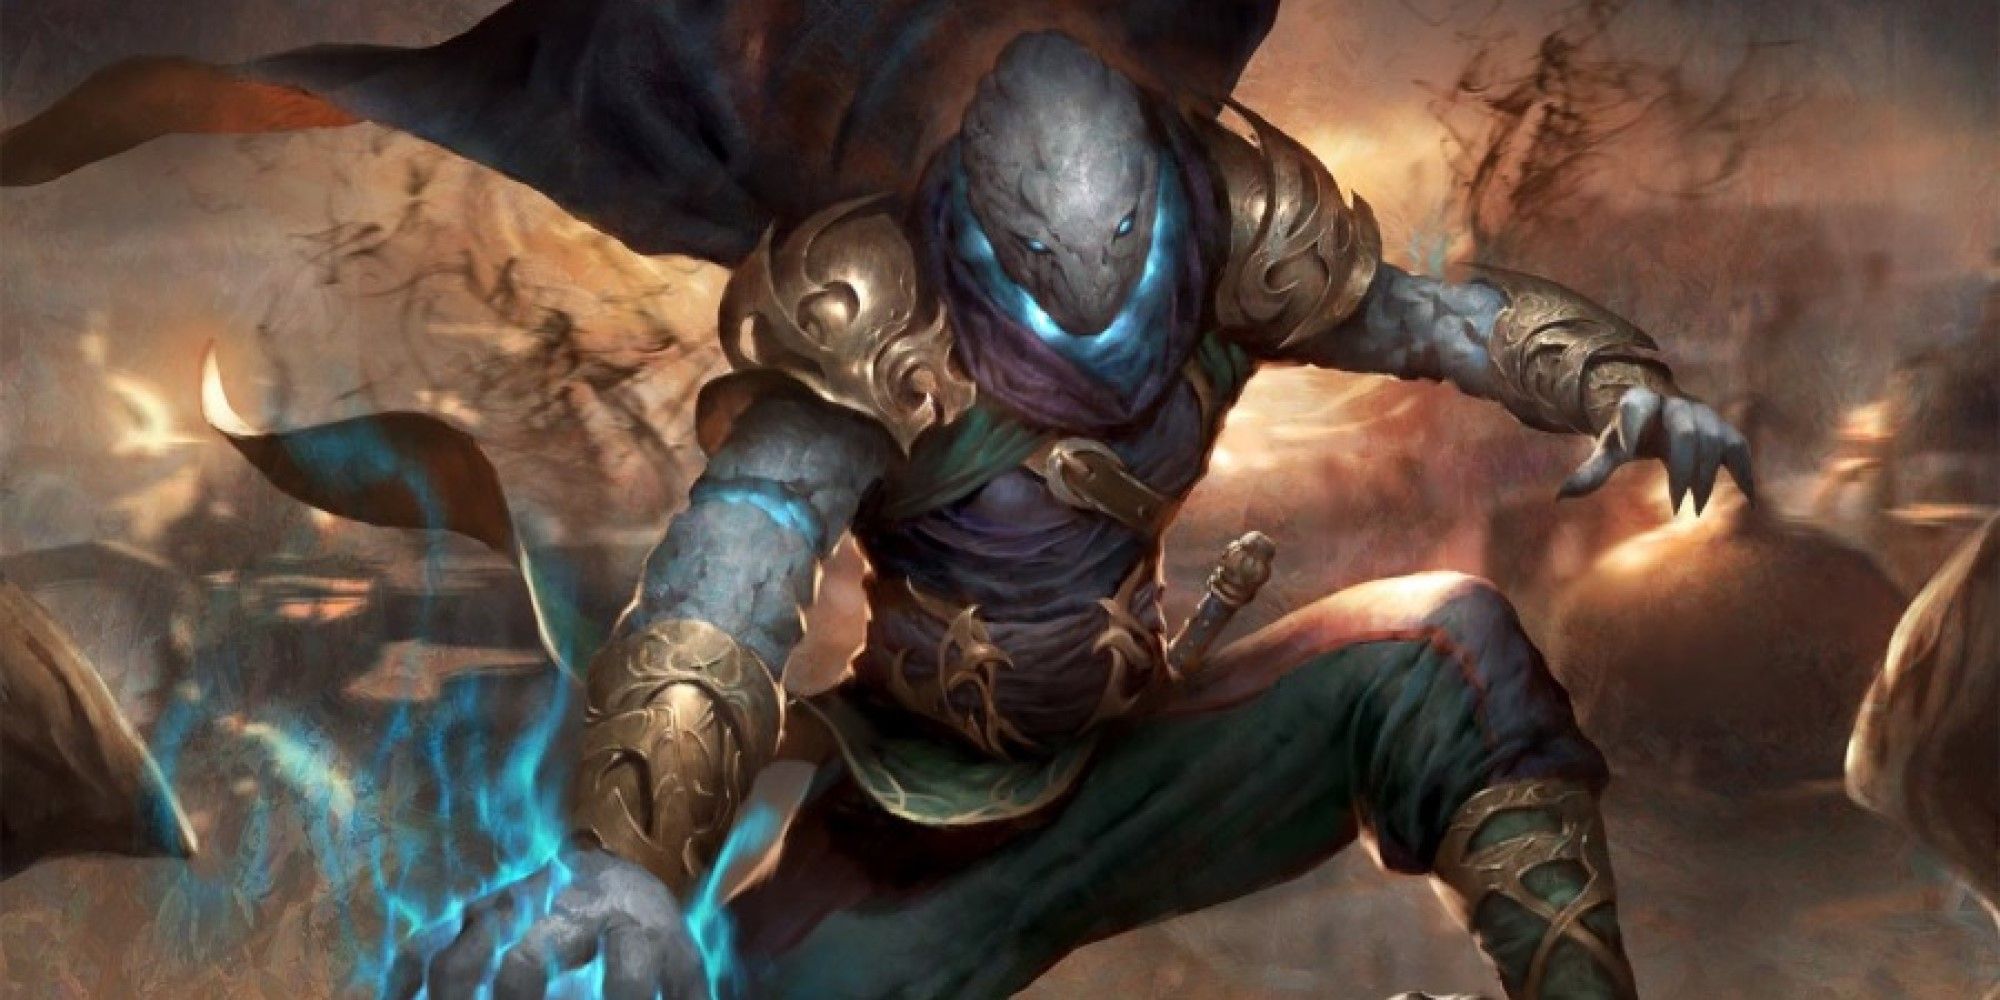 MTG Aetherborn warrior who absorbs the life force of fallen enemies.